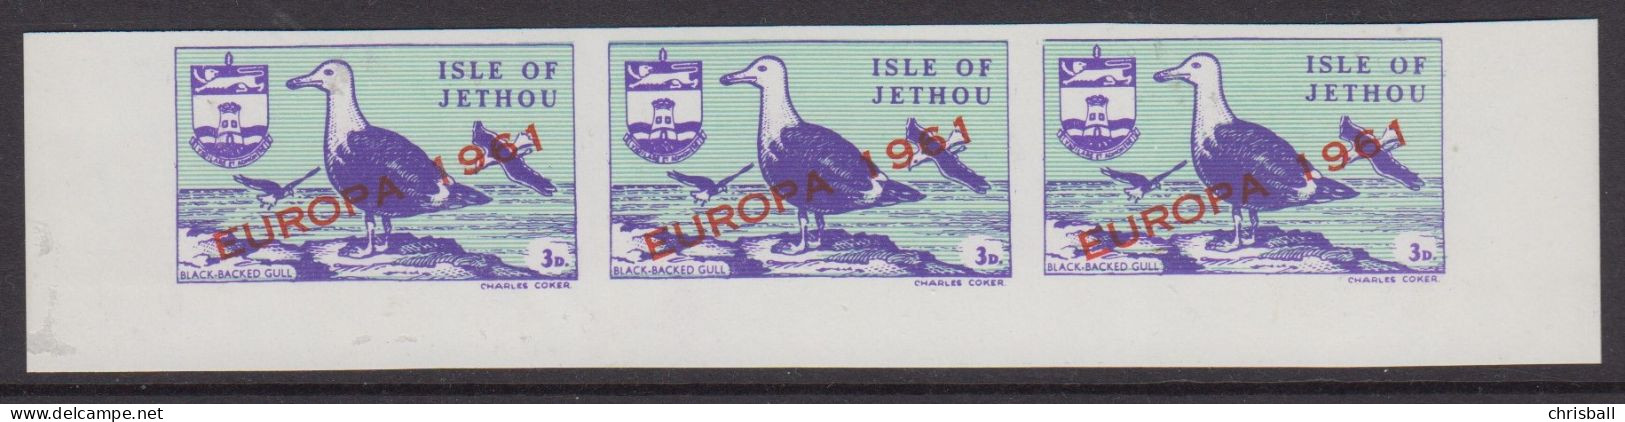 Guernsey Jethou Europa 1961 3d, IMPERF Strip Of 3 Unmounted Mint - Guernesey